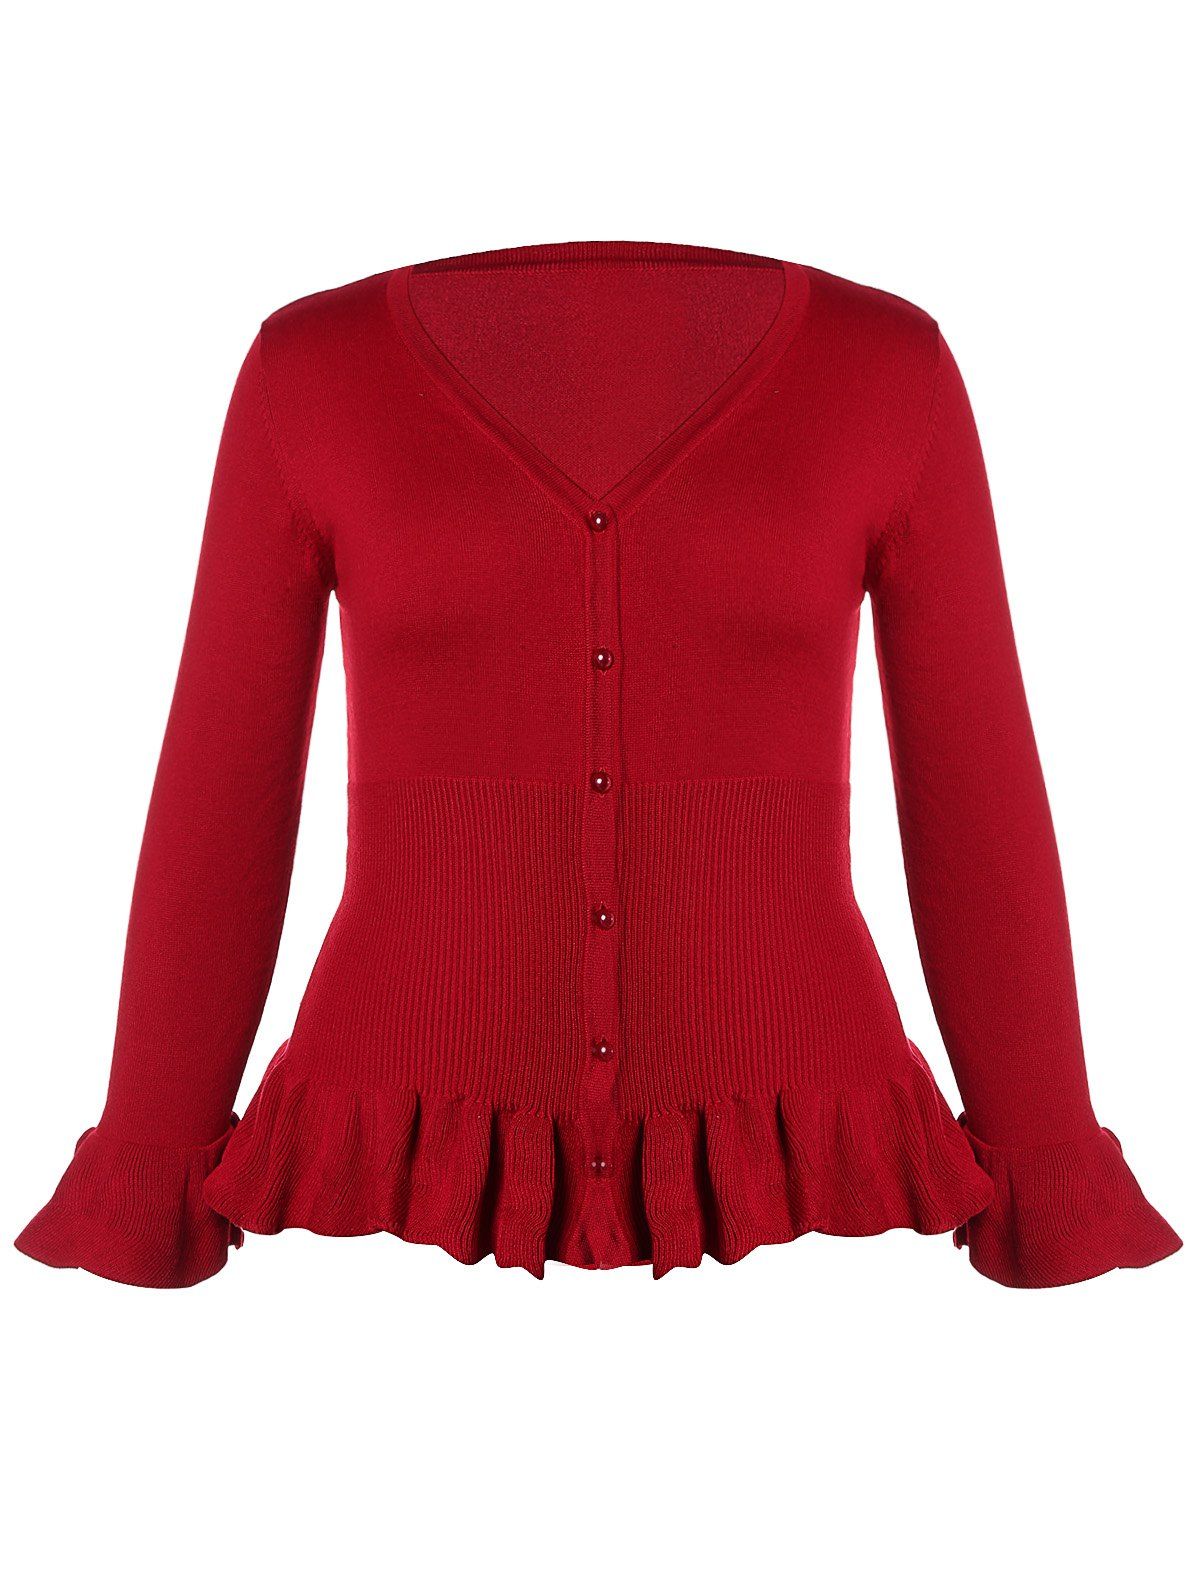 [41% OFF] 2021 Plus Size Ruffled Button Knit Cardigan In RED WINE ...